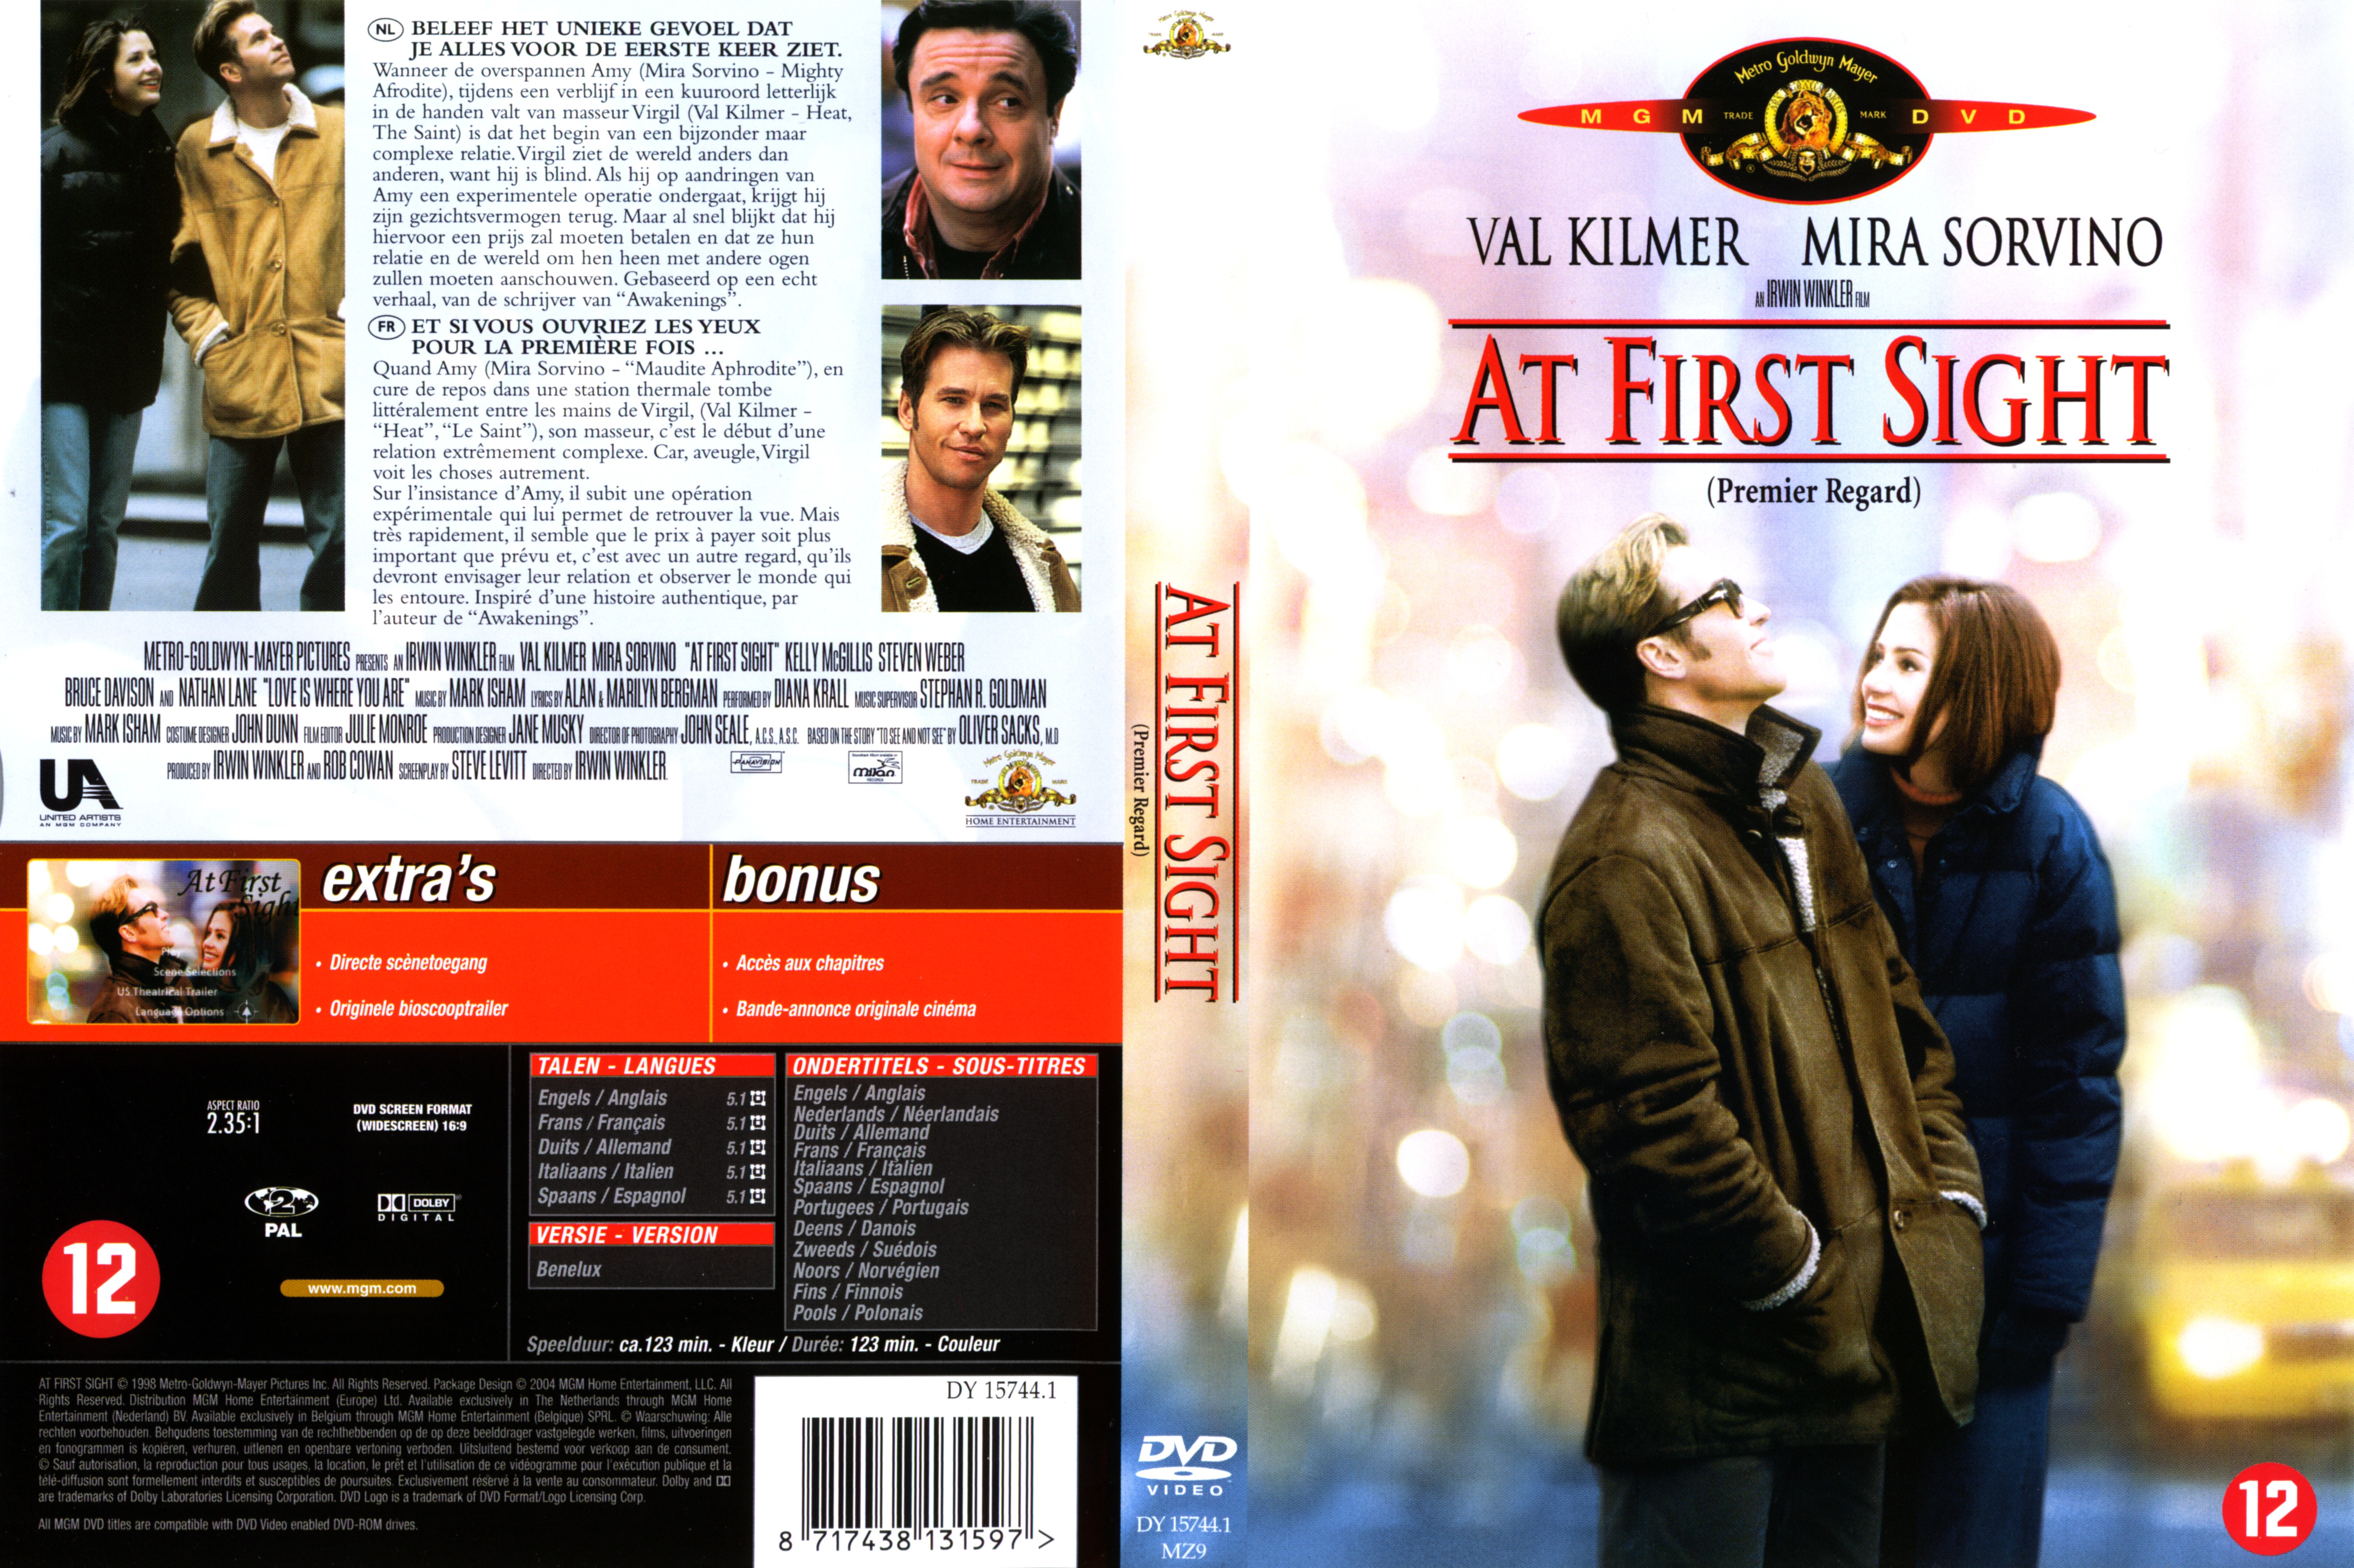 Jaquette DVD At first sight